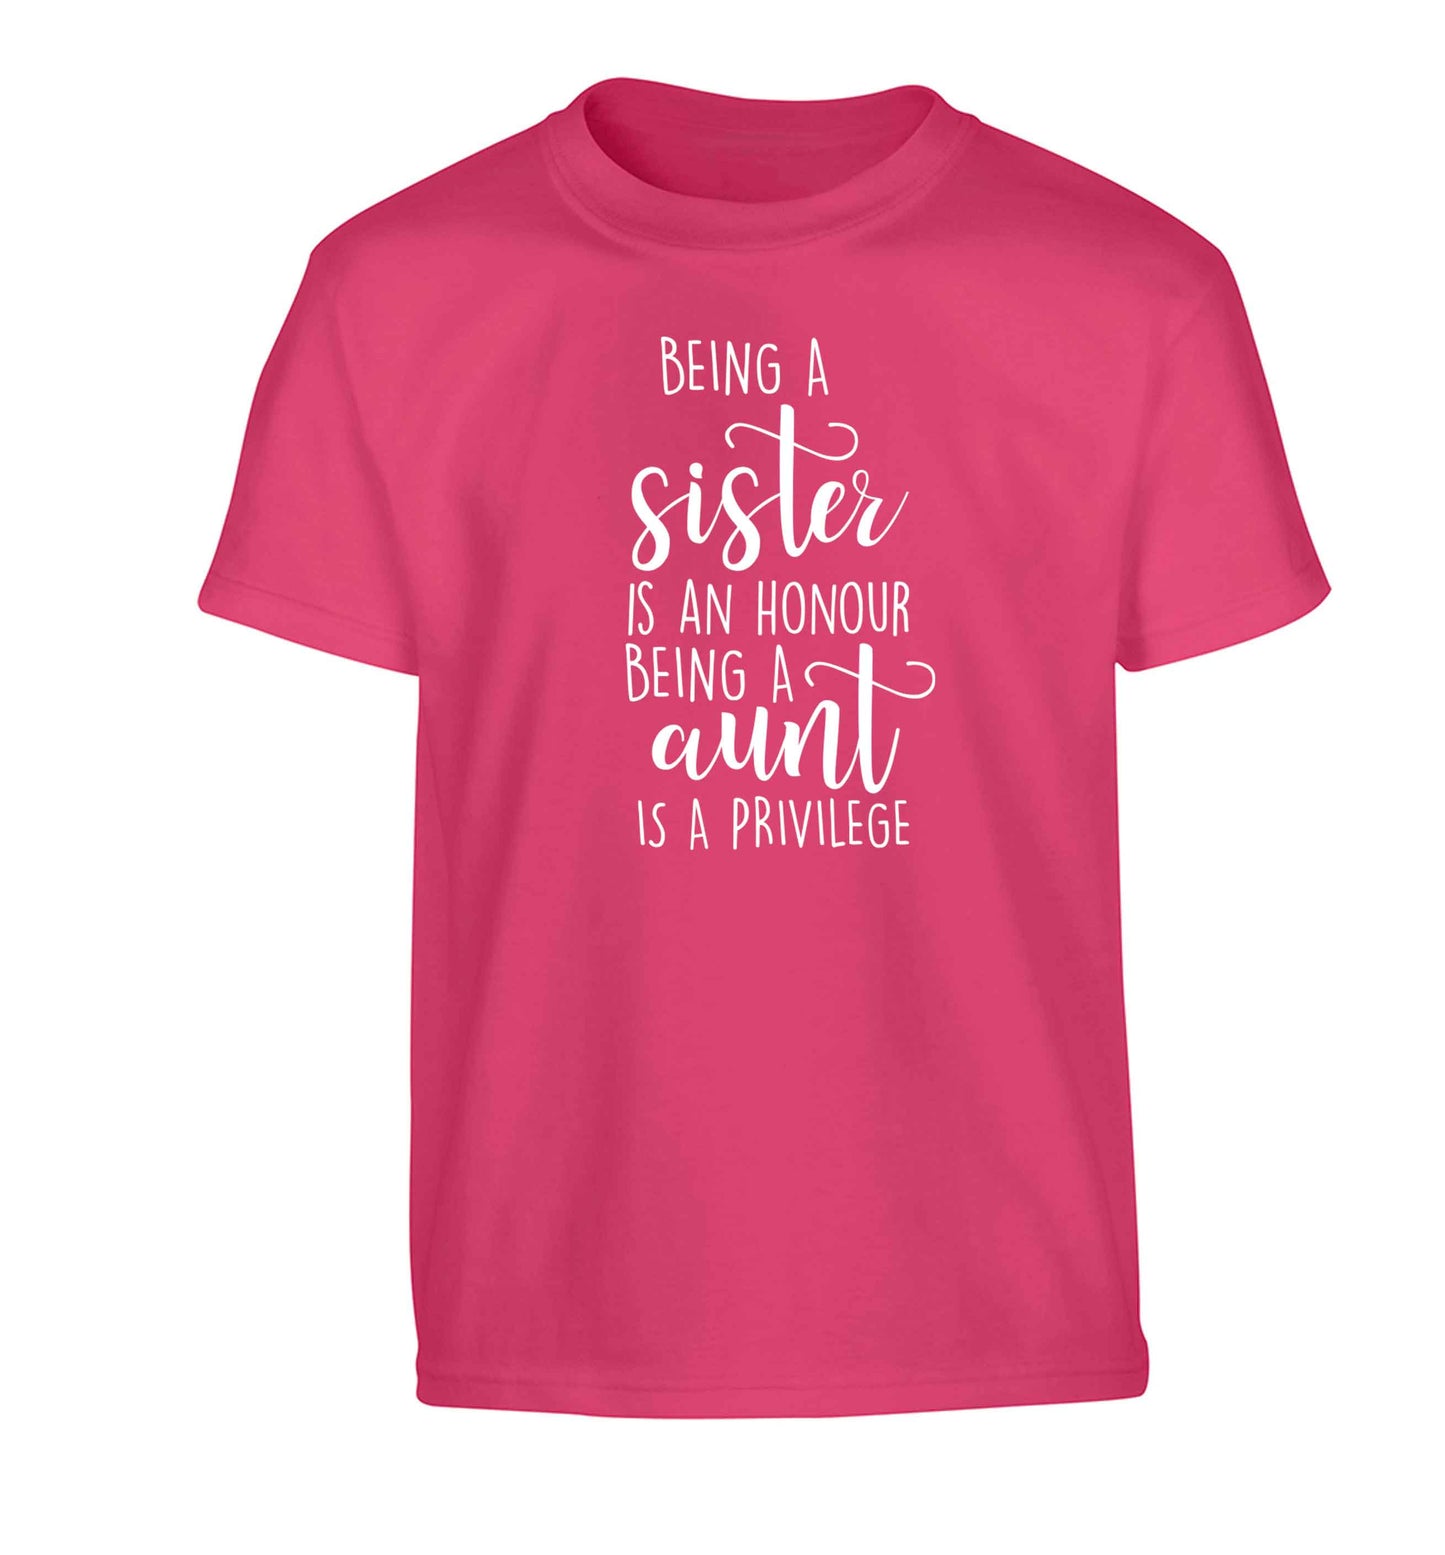 Being a sister is an honour being an auntie is a privilege Children's pink Tshirt 12-13 Years